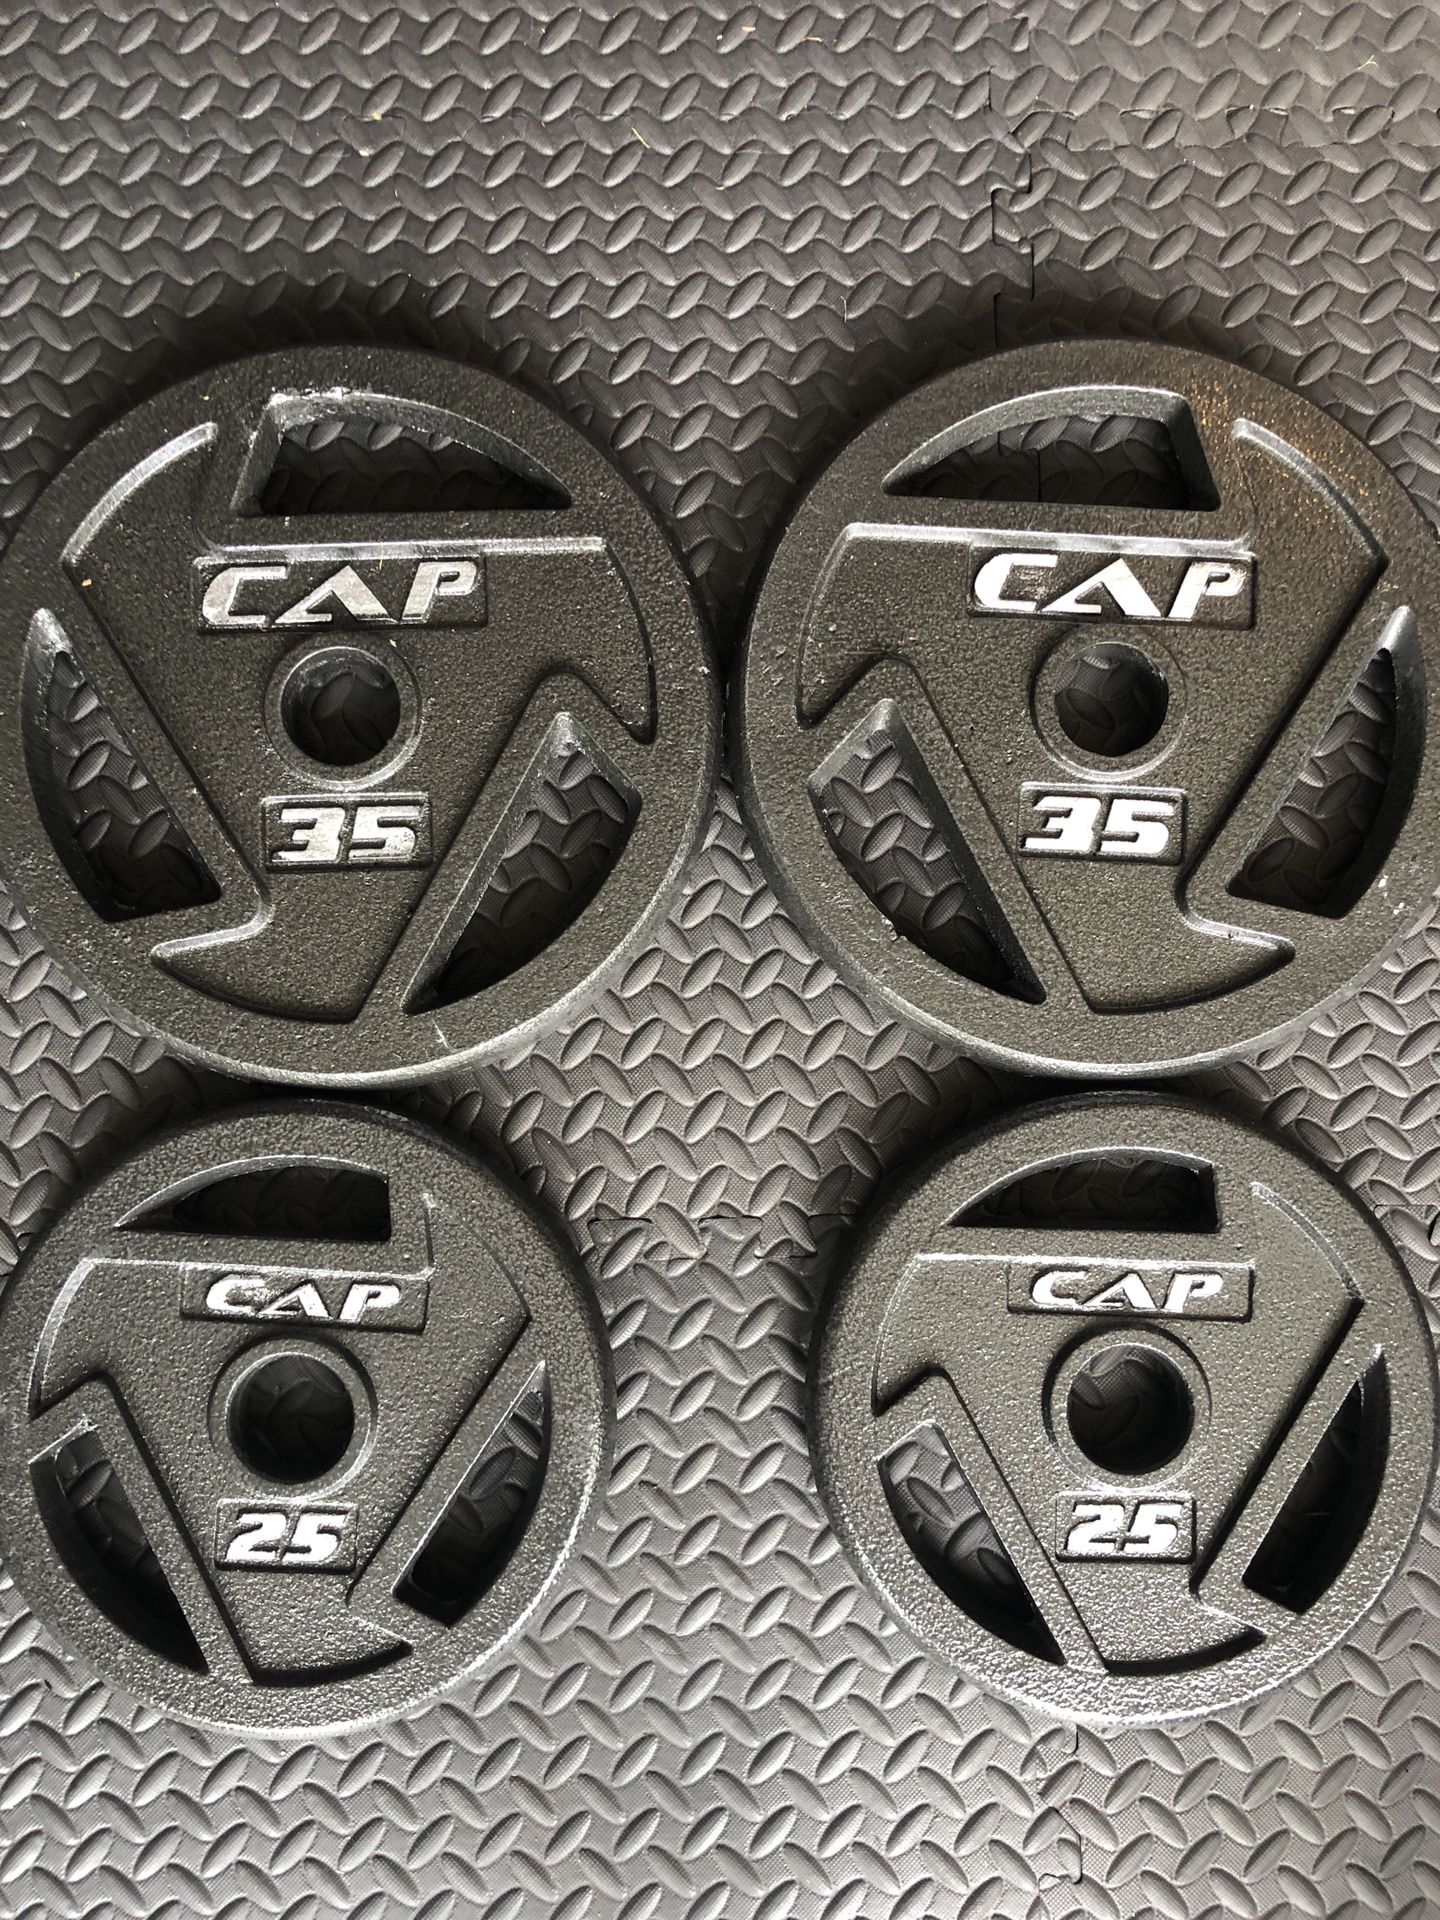 New Olympic weight plates - weight Lifting